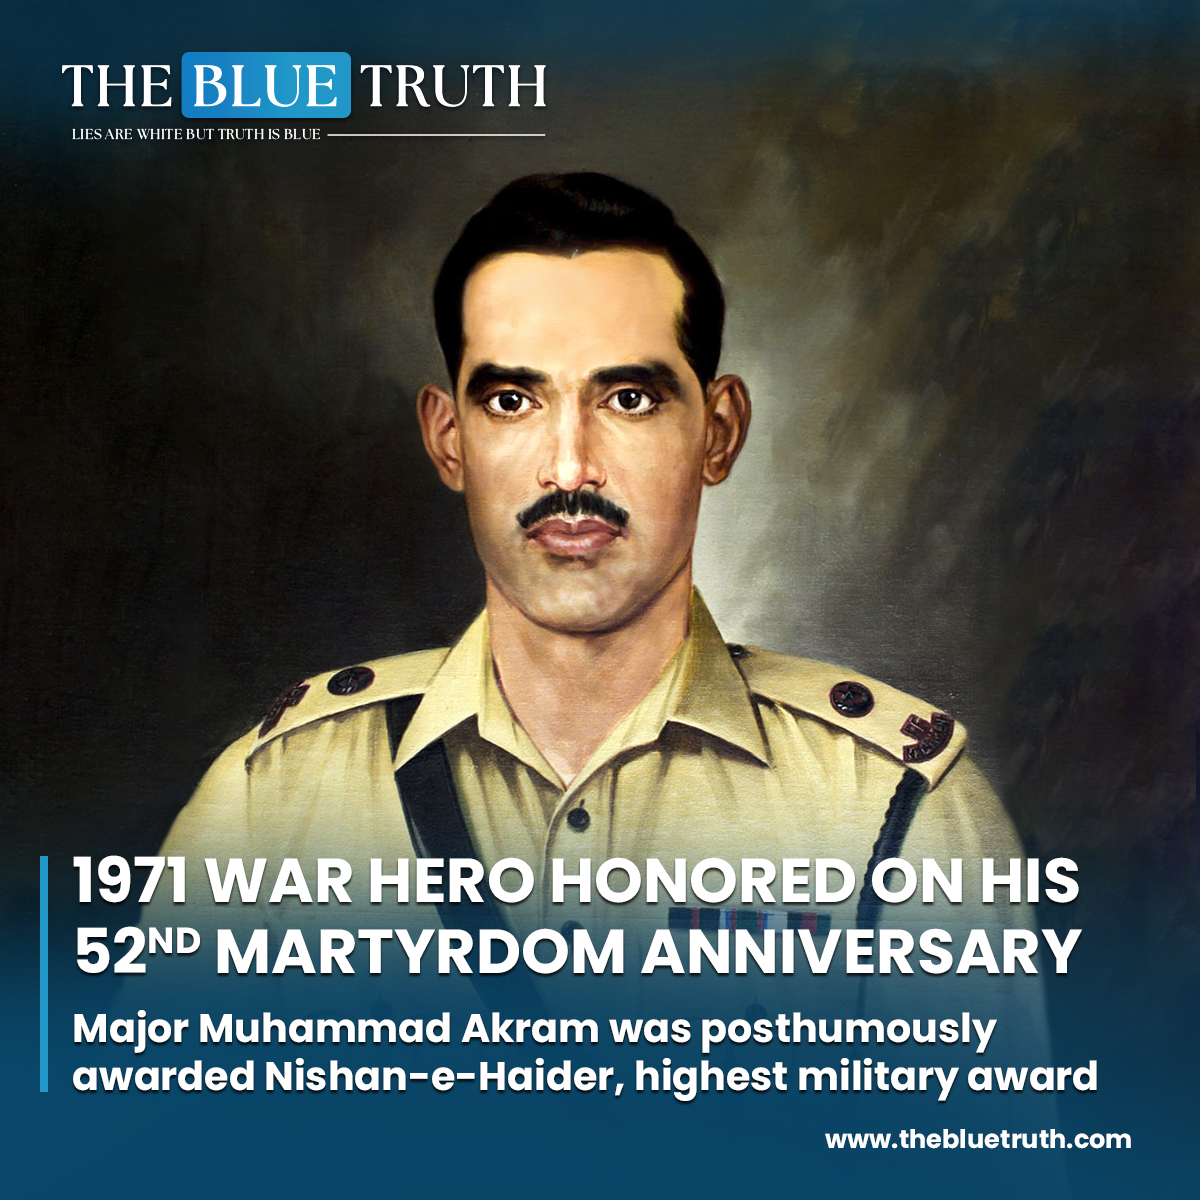 1971 war hero honored on his 52nd martyrdom anniversary.
Major Muhammad Akram was posthumously awarded Nishan Haider for sacrificing his life to defend motherland

#MajorMuhammadAkram #NishaneHaider #1971WarHero #MartyrdomAnniversary #LegacyOfCourage #TBT #TheBlueTruth